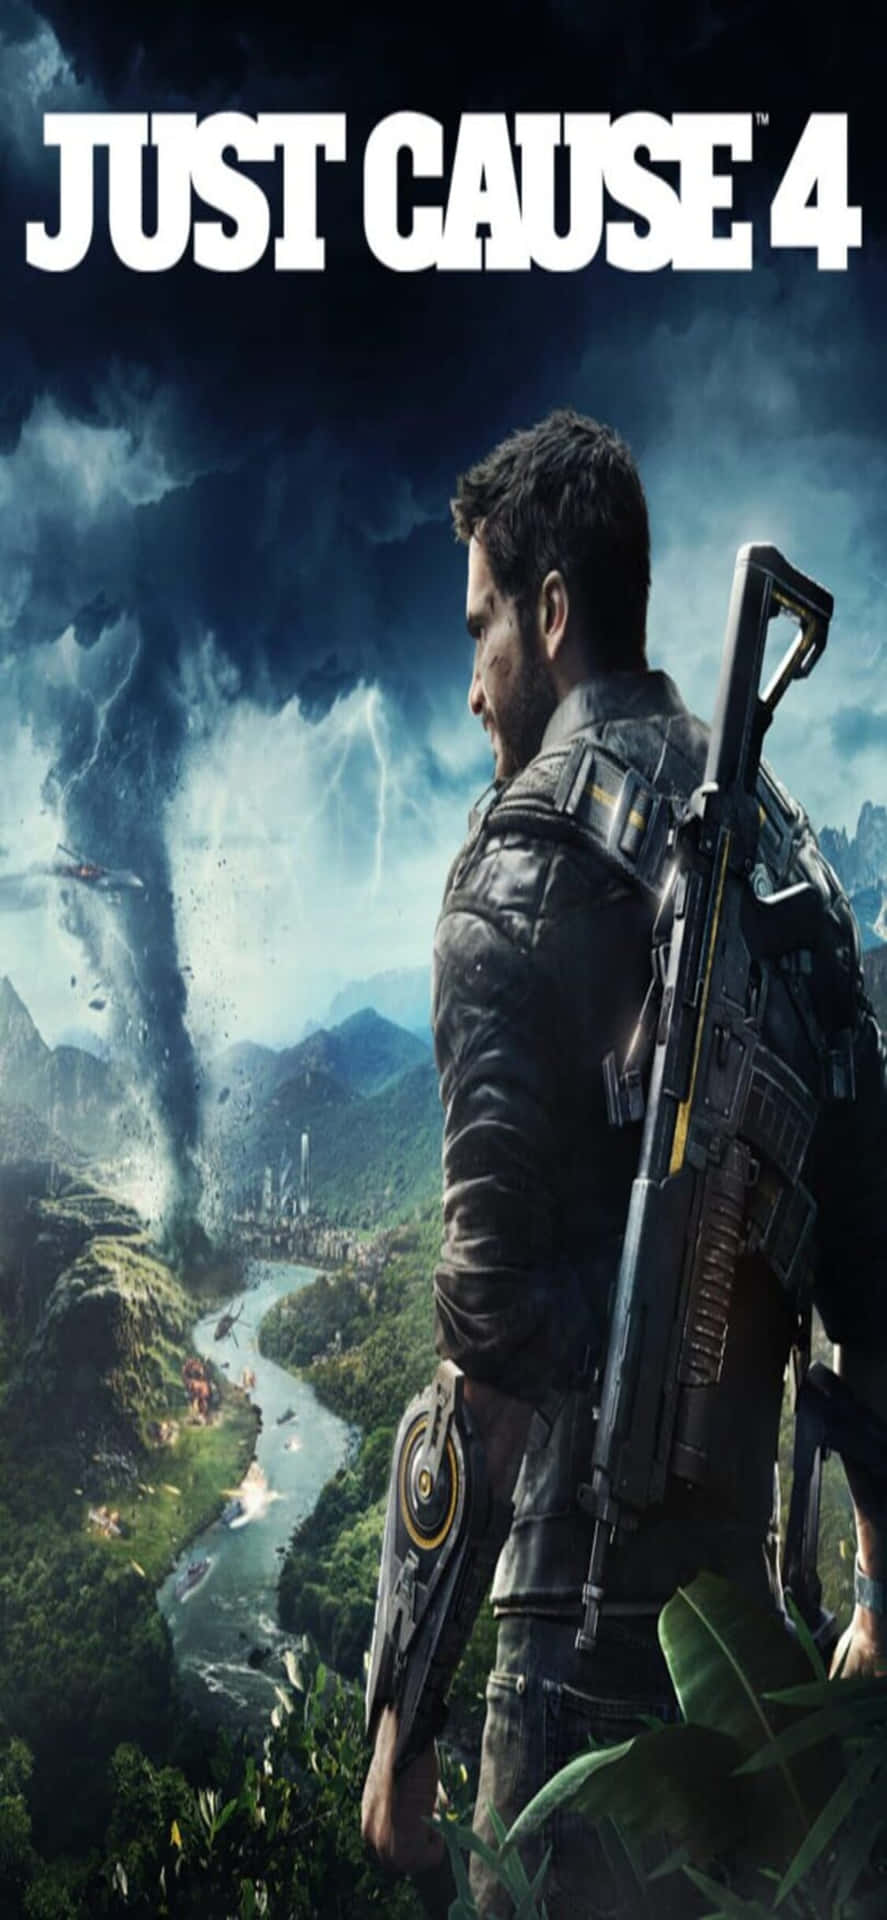 Play Just Cause 4 on your Iphone X!